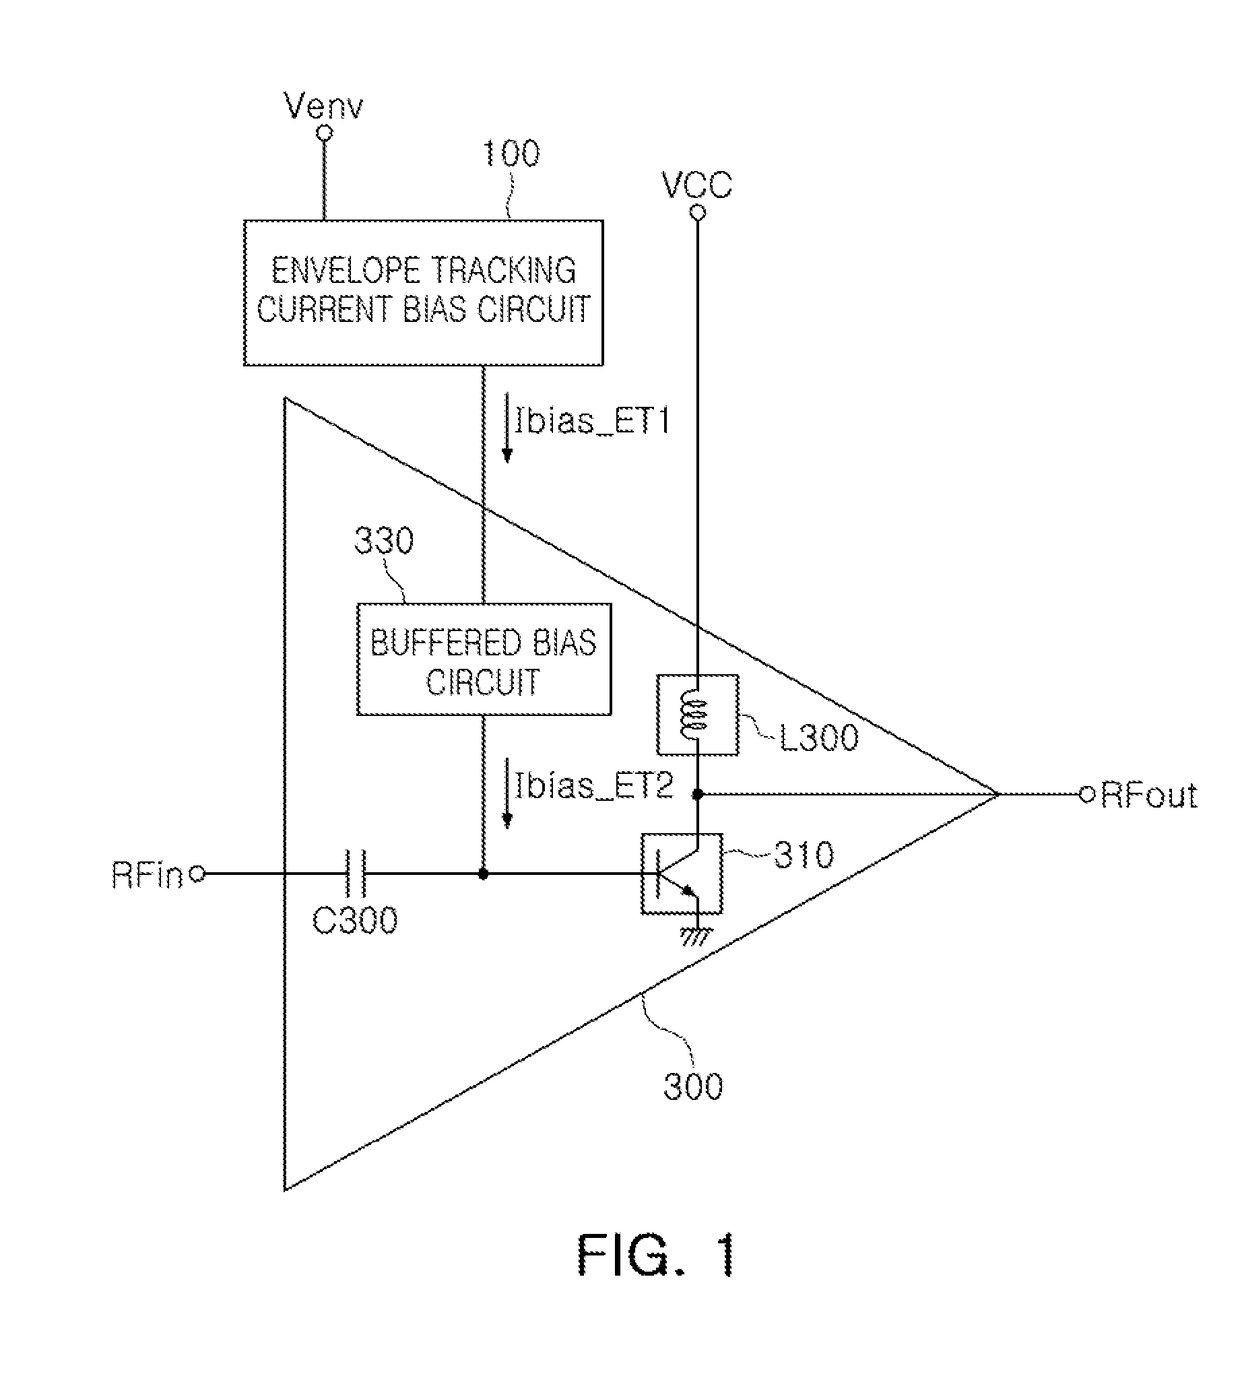 Envelope tracking current bias circuit and power amplifier apparatus